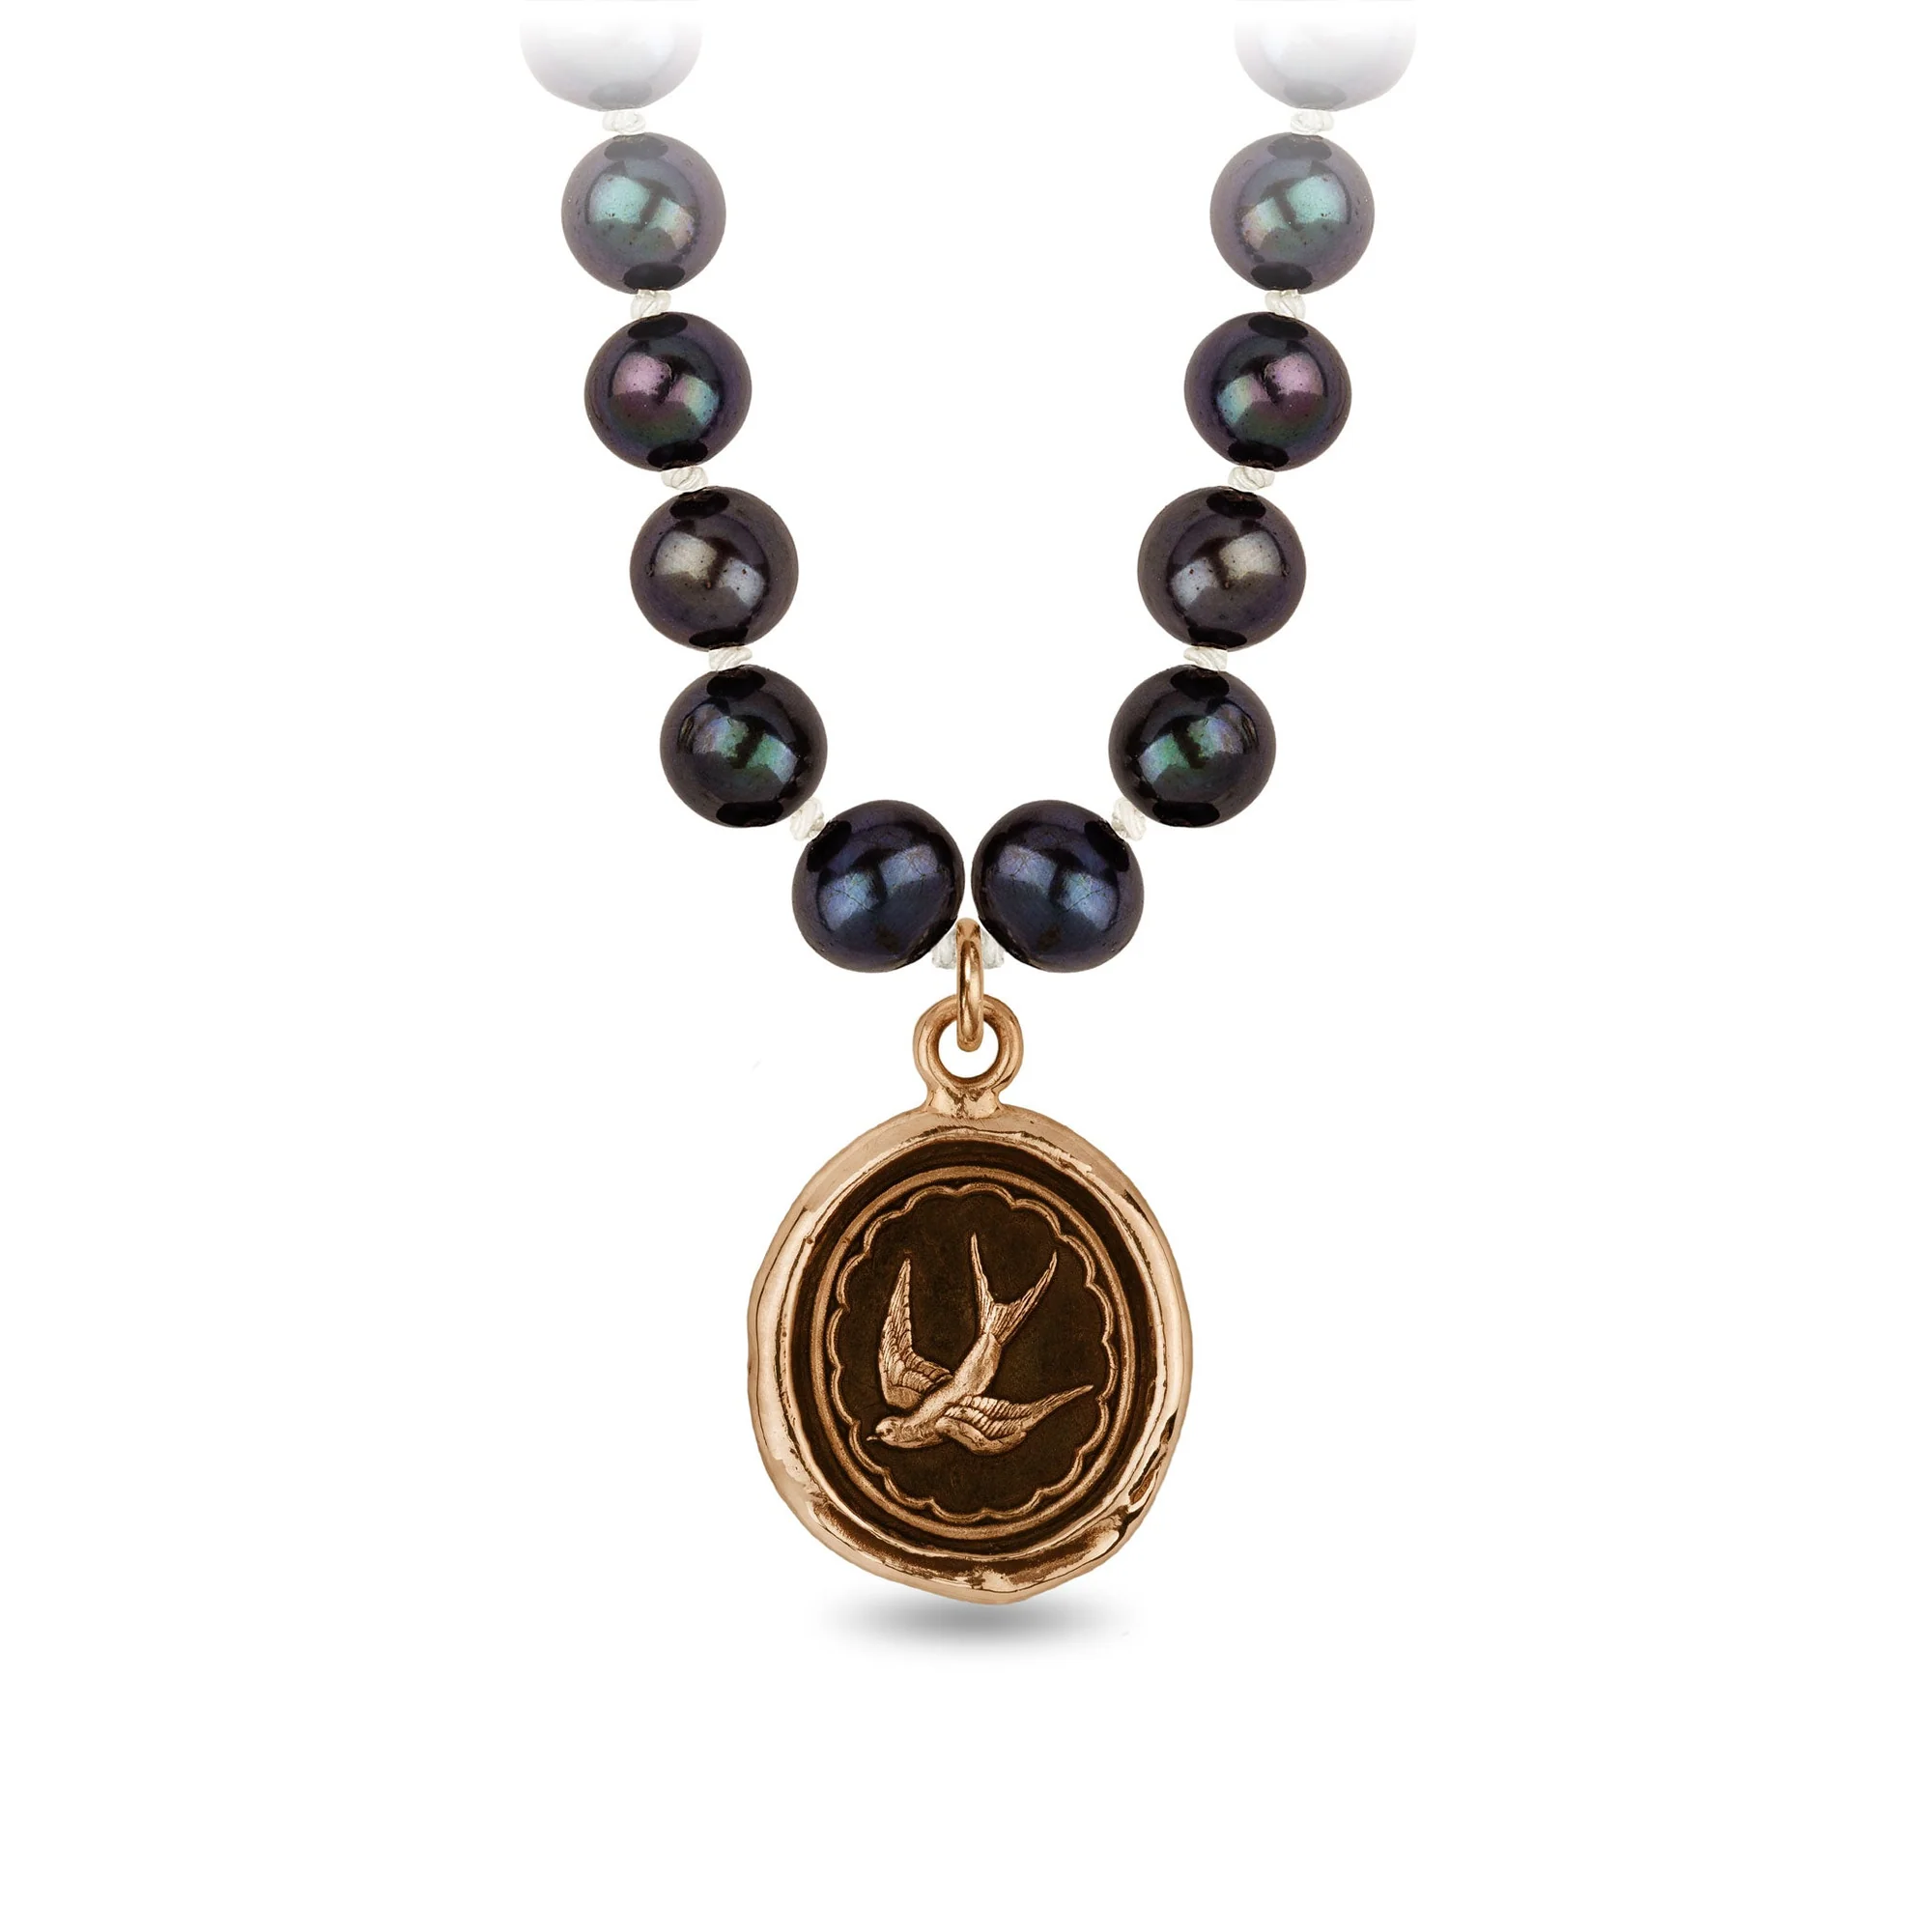 Free Spirited Freshwater Pearl Necklace| Magpie Jewellery